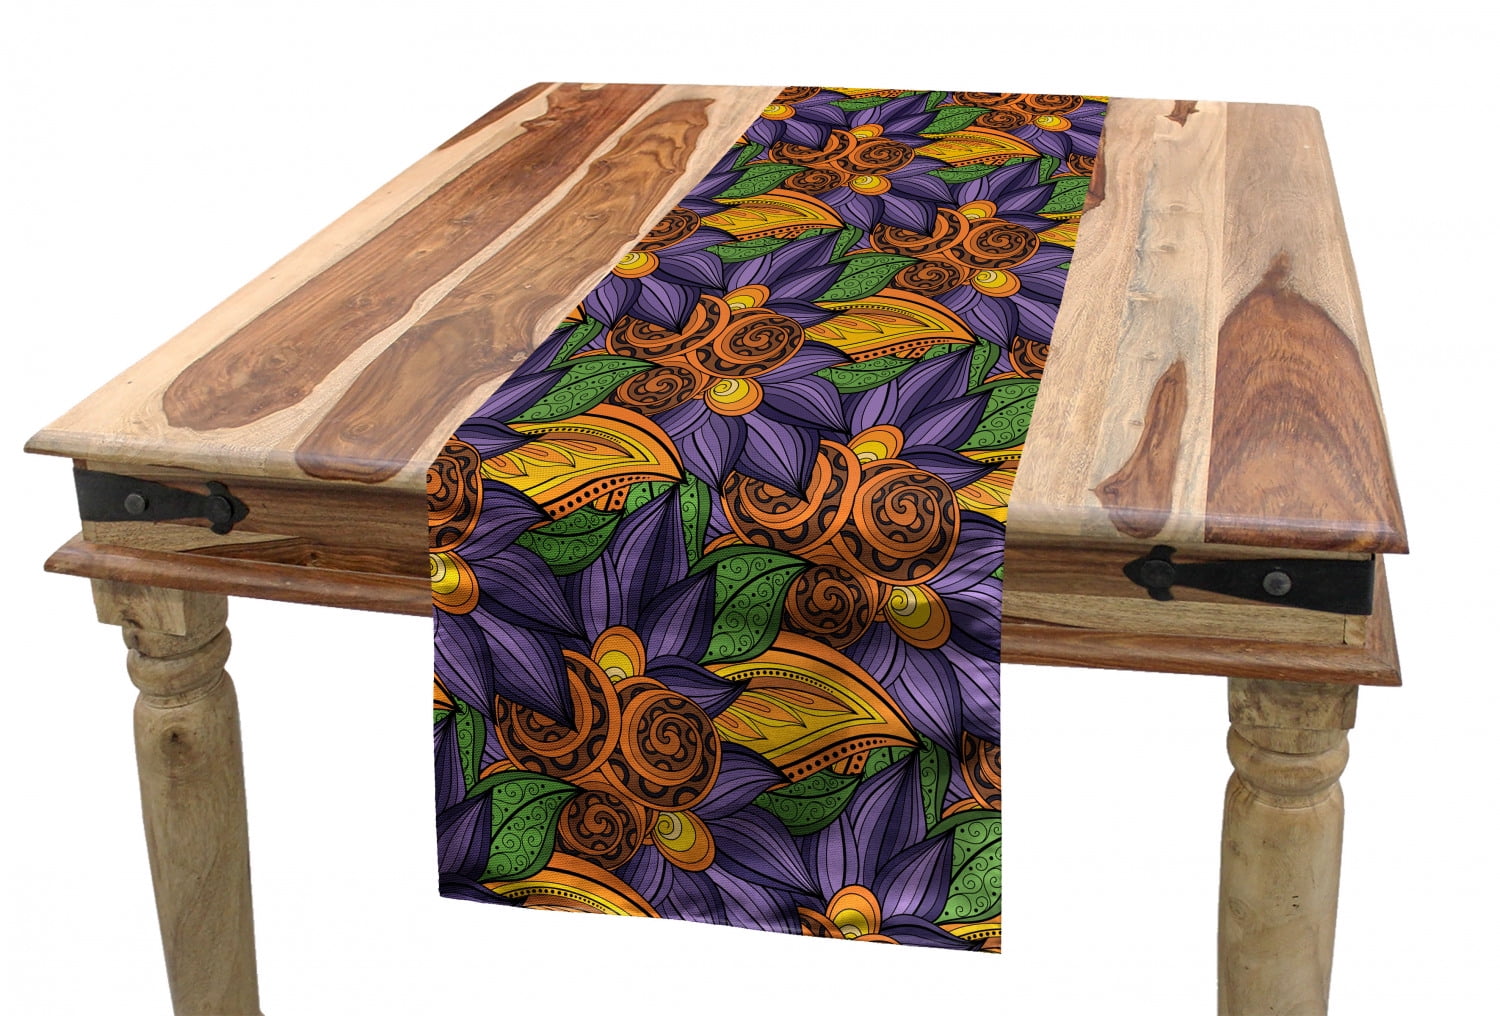 Marigold Violet Purple Ambesonne Floral Tablecloth 52 X 70 Vibrant Flowers Botany Mother Earth Tropicana Exotic Funky Vibes Pattern Dining Room Kitchen Rectangular Table Cover